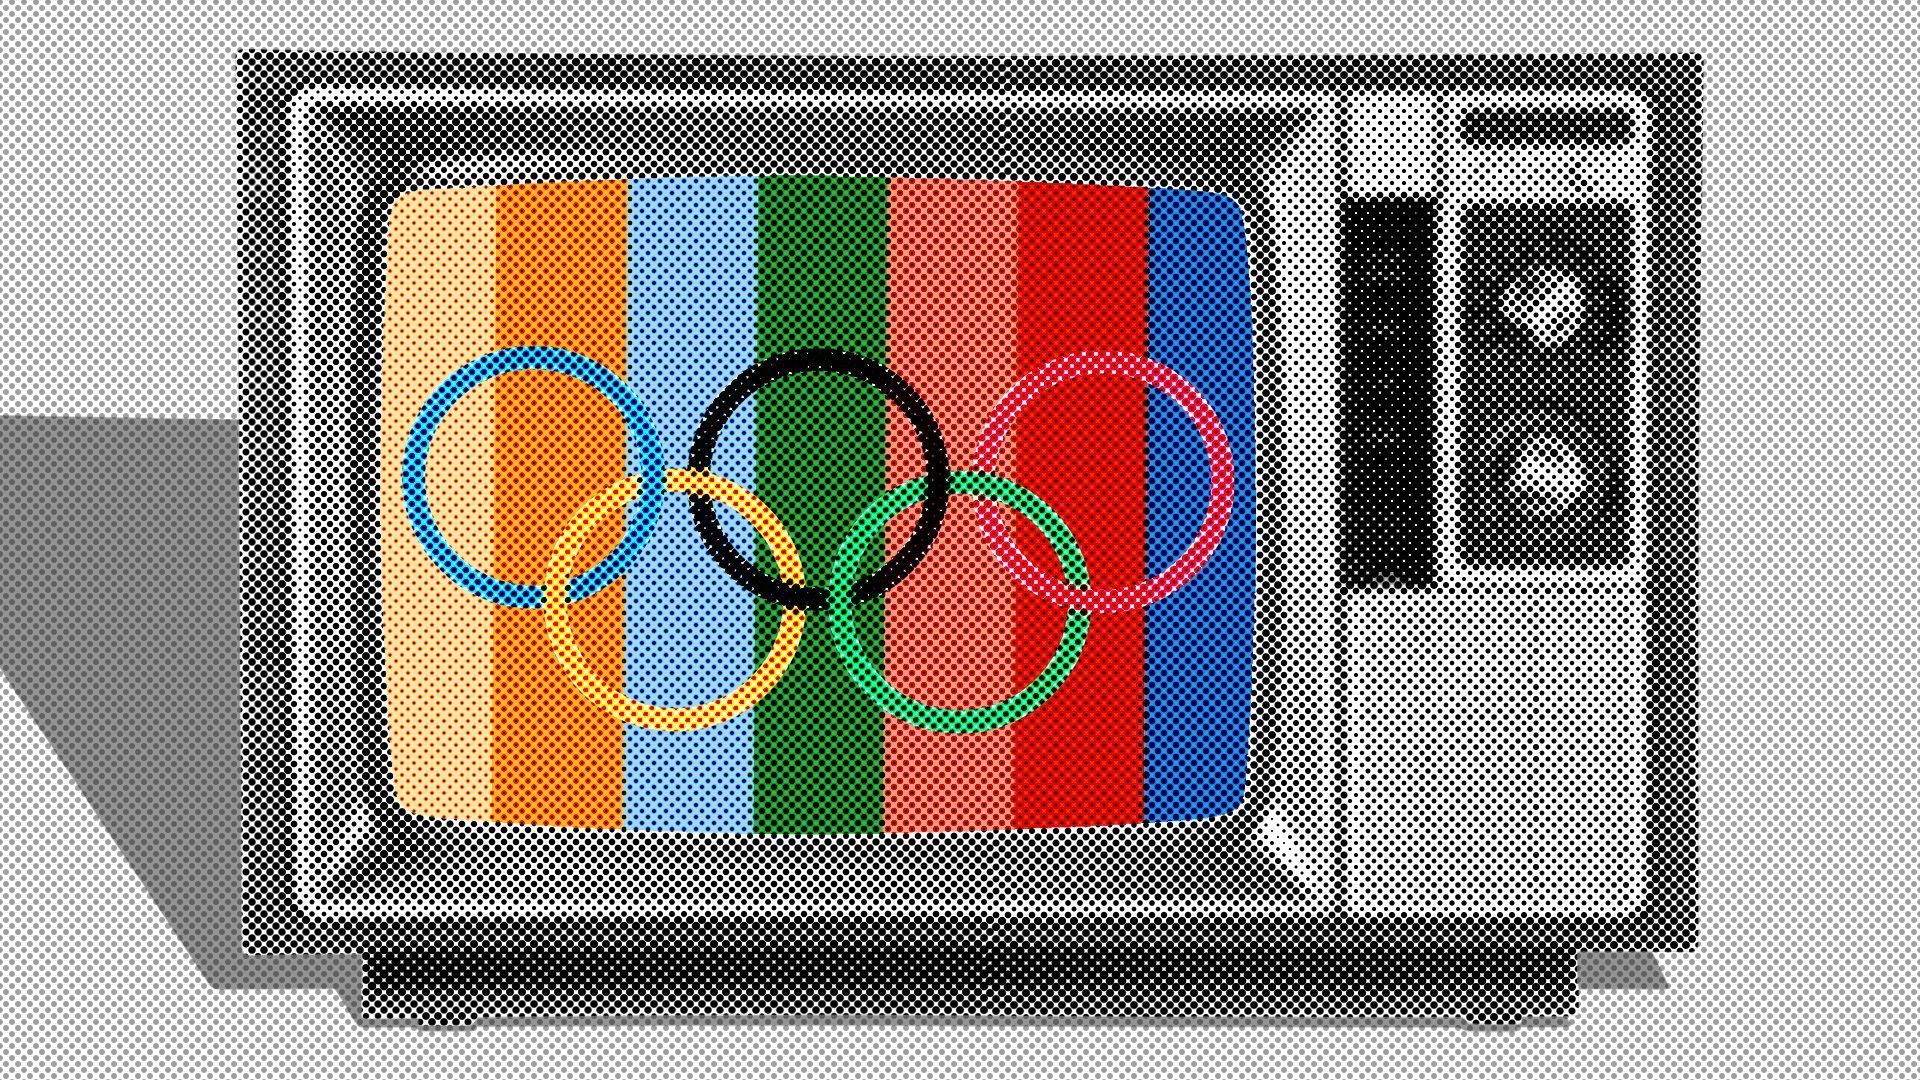 Illustration of an old-fashioned television with colored bars on it and the Olympic logo